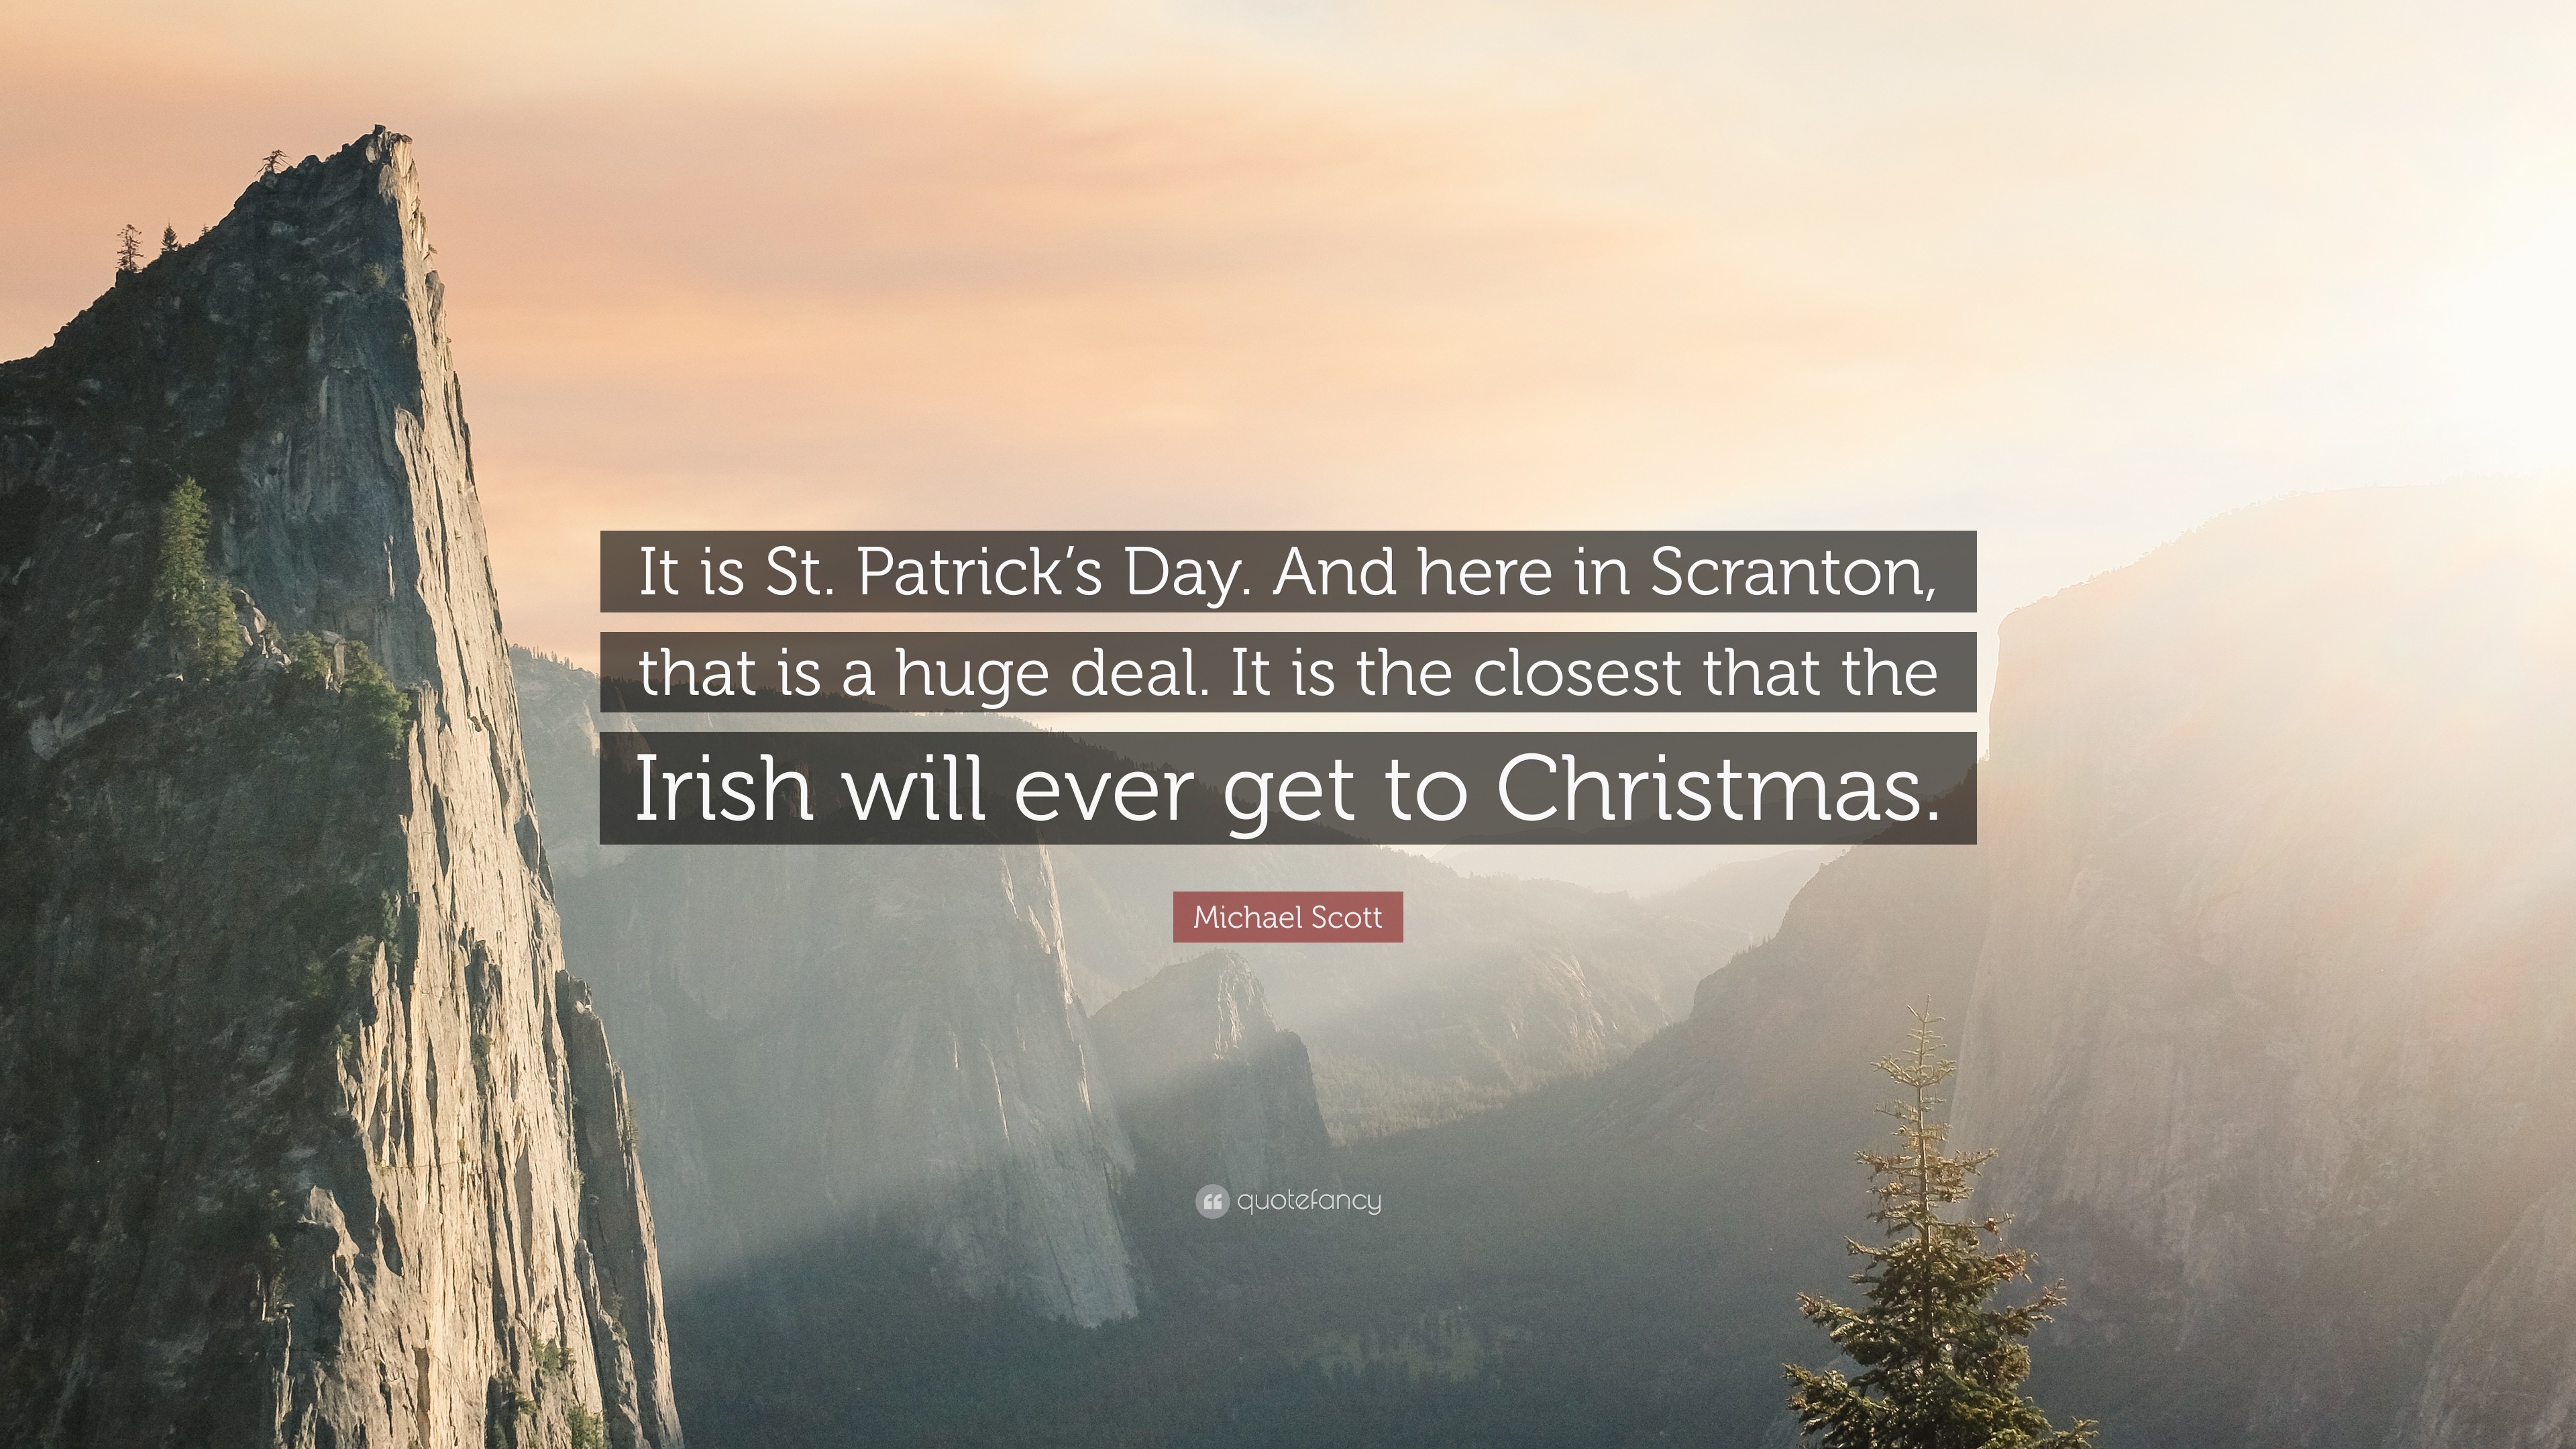 3840x2160 Michael Scott Quote: “It is St. Patrick's Day. And here in Scranton